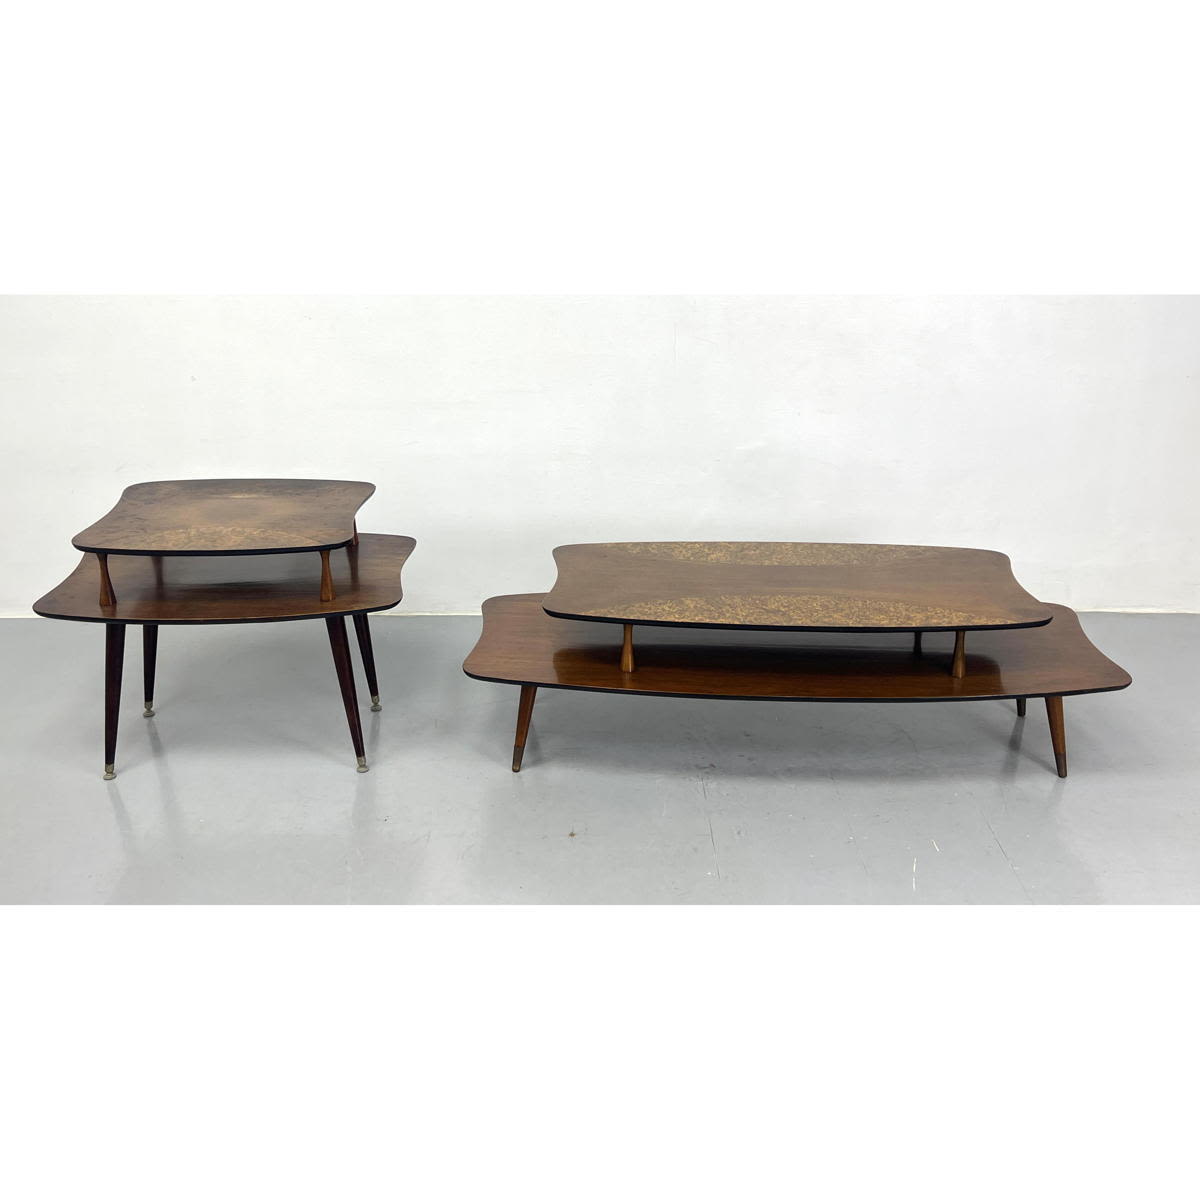 2pcs American Modern Tables Decorated 2ff855